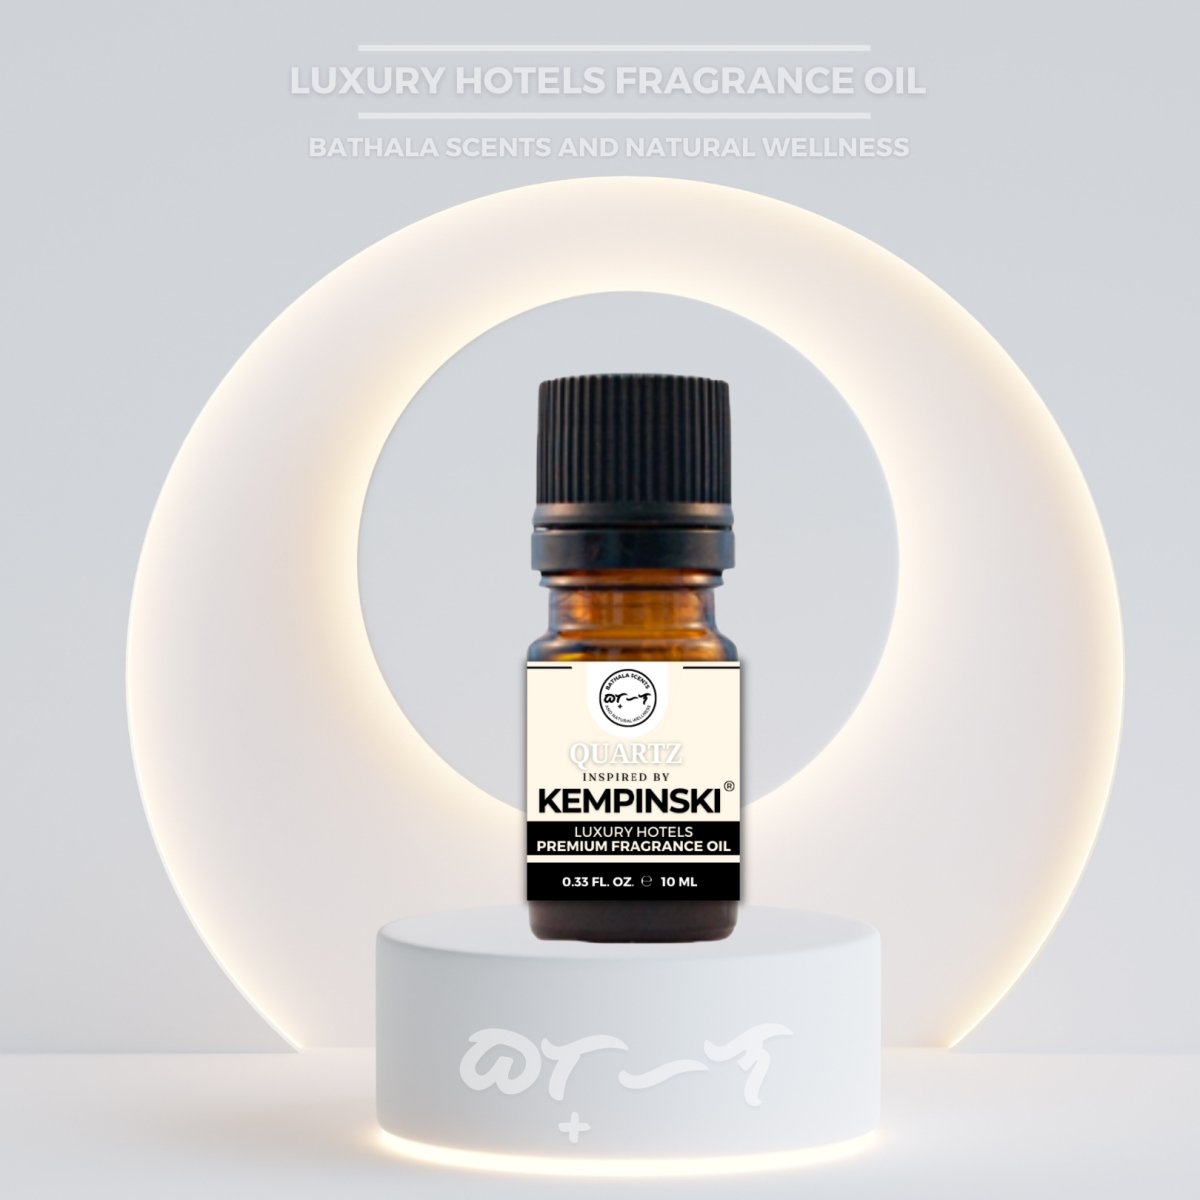 Quartz Inspired by Kempinski Luxury Hotels Fragrance Oil 10ml - Bathala Scents and Natural Wellness